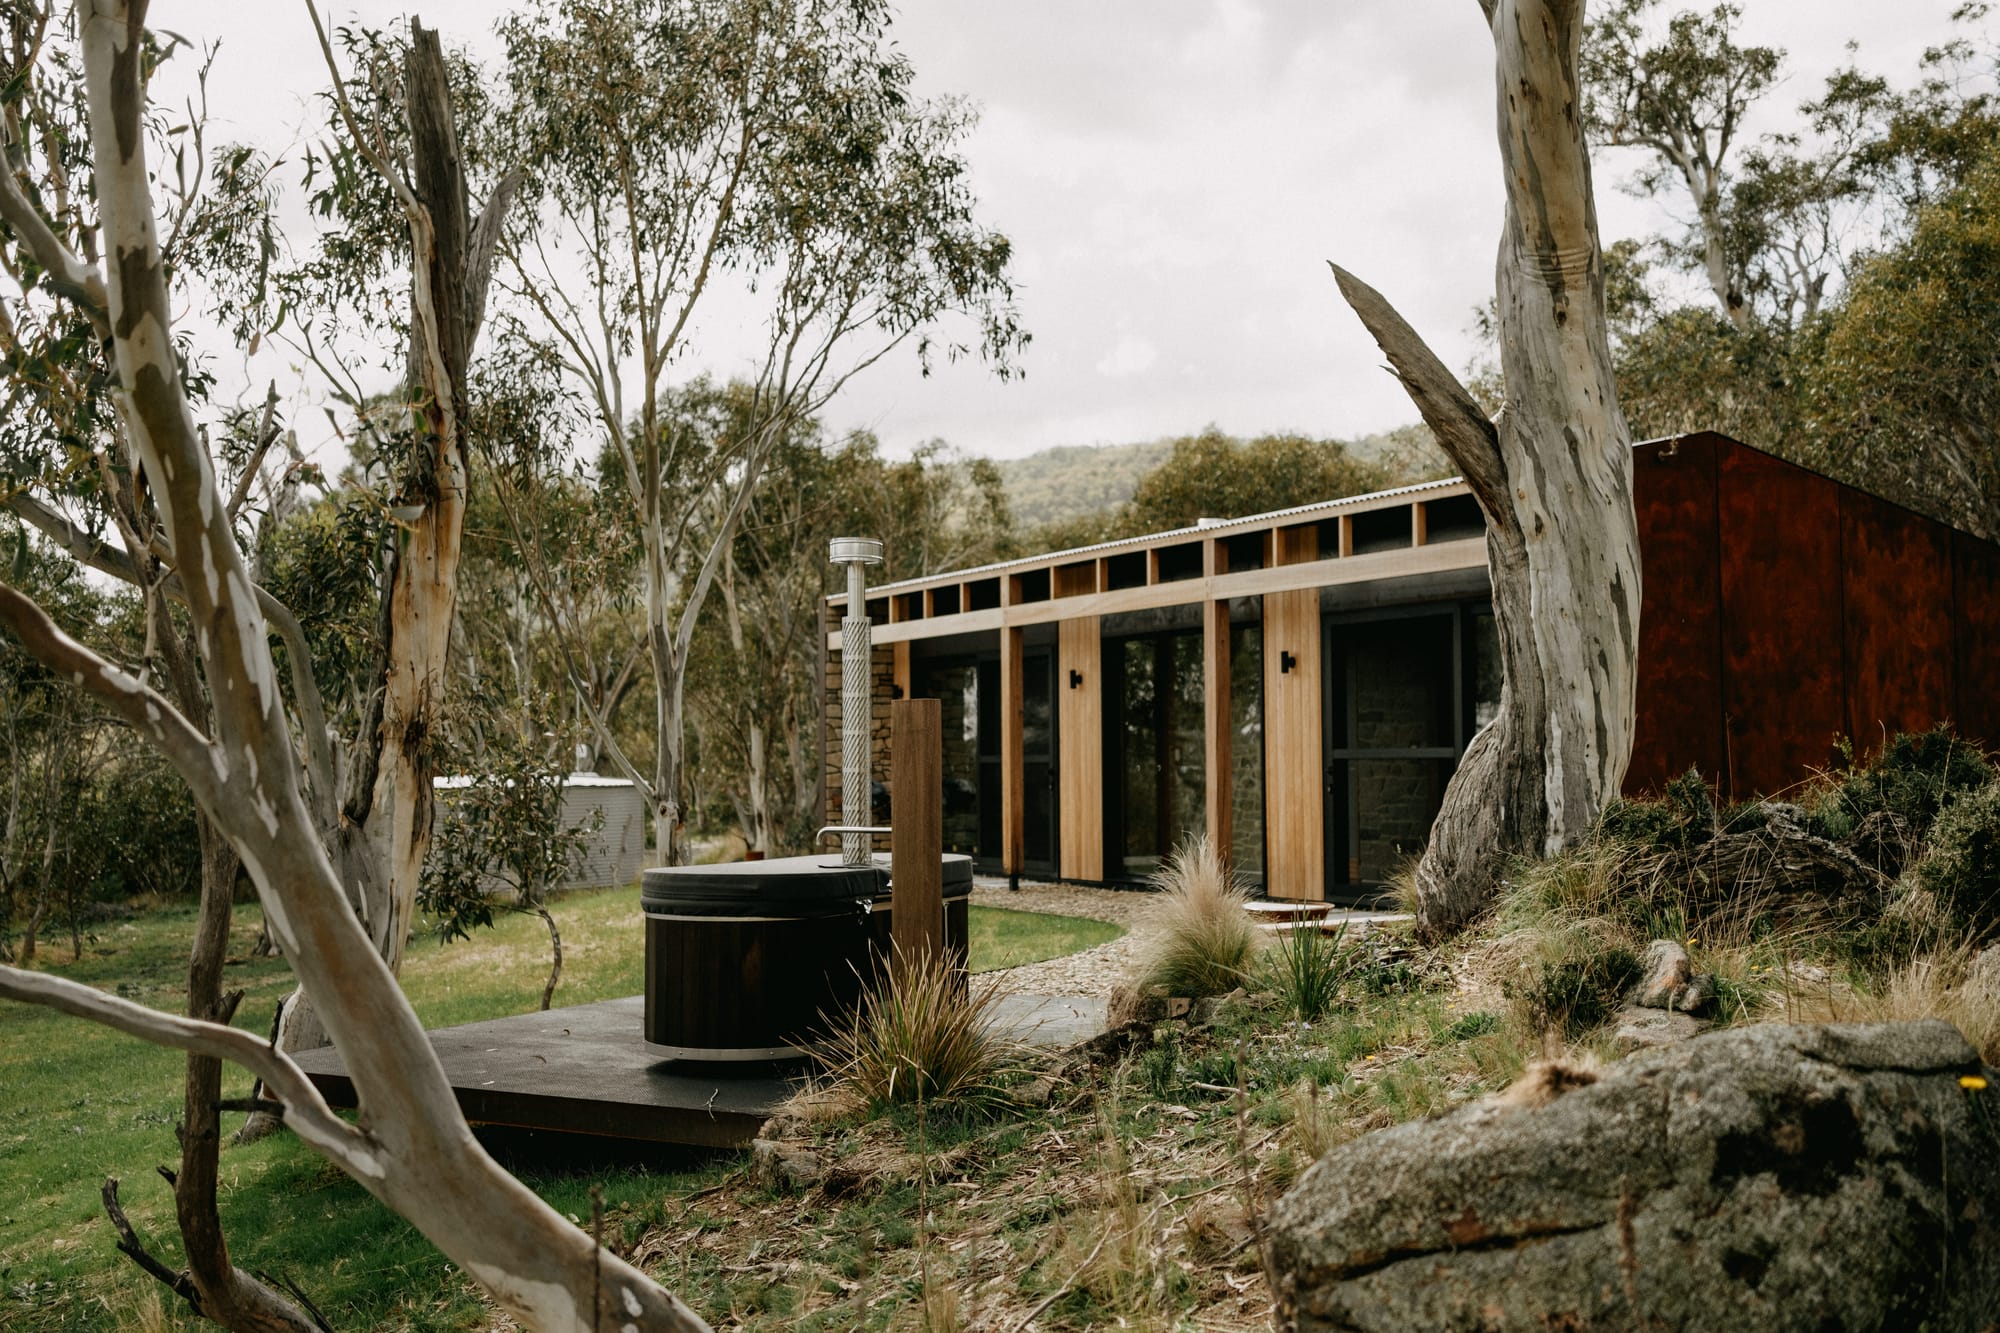 Crafters Eco-Cabins. Image copyright of Crafters. External facade of timber clad cabin with external bath on timber deck. Native Australian bushland surrounds cabin.